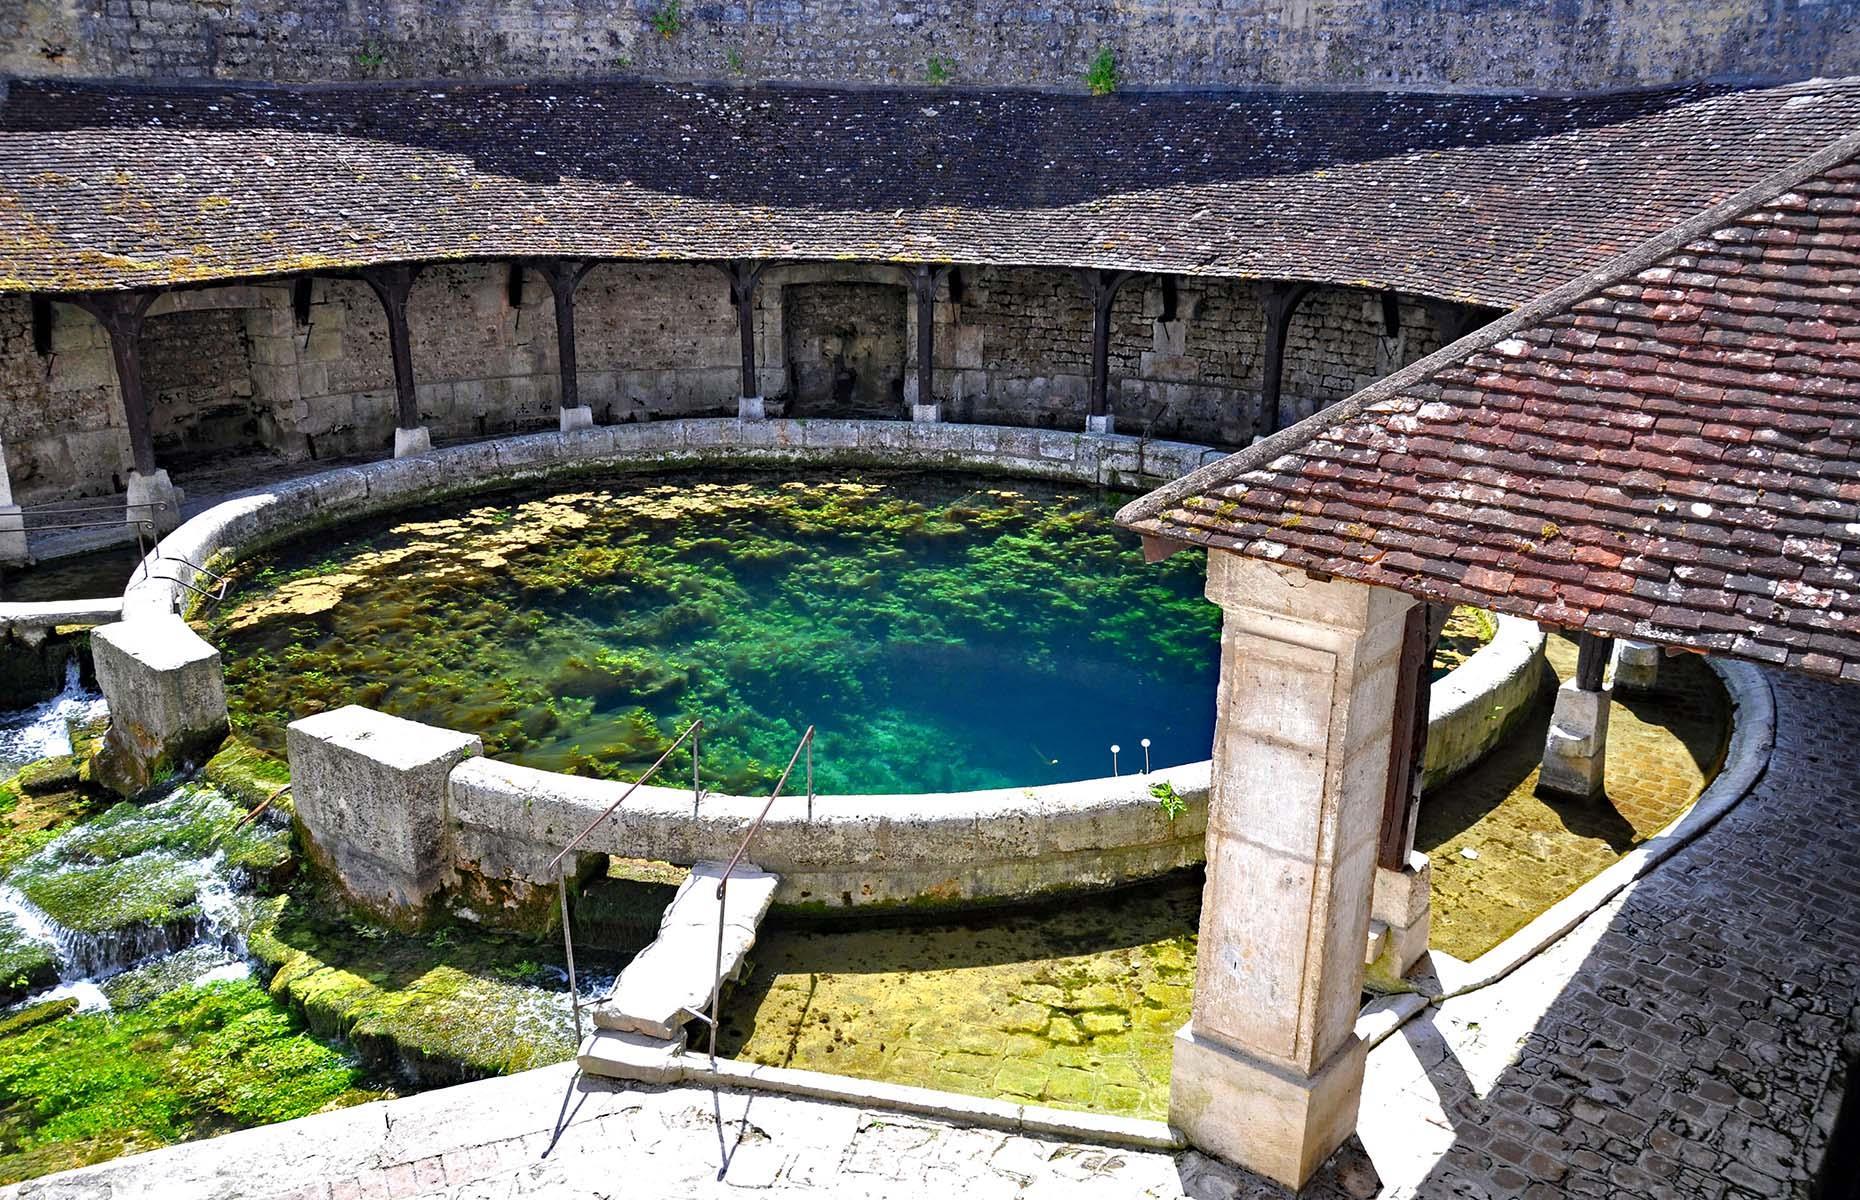 <p>In 1974, two hardy divers descended into the pit in an attempt to find the water's origin, but died while attempting to navigate its narrow passages. More than 20 years later, another diver went down into the well and met the same sorry fate. In October 2019, professional diver Pierre-Éric Deseigne was hired by the town to explore the spring, filming as he went. He managed to descend some 1,214 feet (370m) underwater, further than anyone had ever been before. But, while his footage gave some indication of what it’s like down there, he still couldn’t locate the spring’s source.</p>  <p><a href="https://www.loveexploring.com/galleries/113050/europes-most-mysterious-places?page=1"><strong>These are Europe's most mysterious places</strong></a></p>